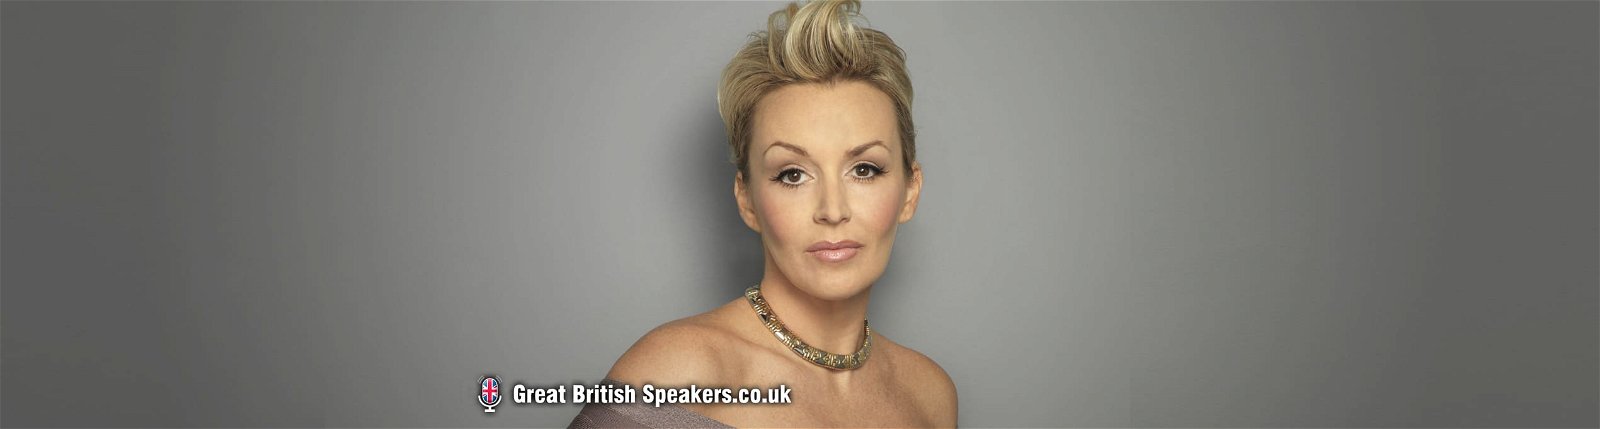 Tessa Hartmann Real Housewives of Jersey Scottish Mary Queen of Shops brand expert speaker at Great British Speakers